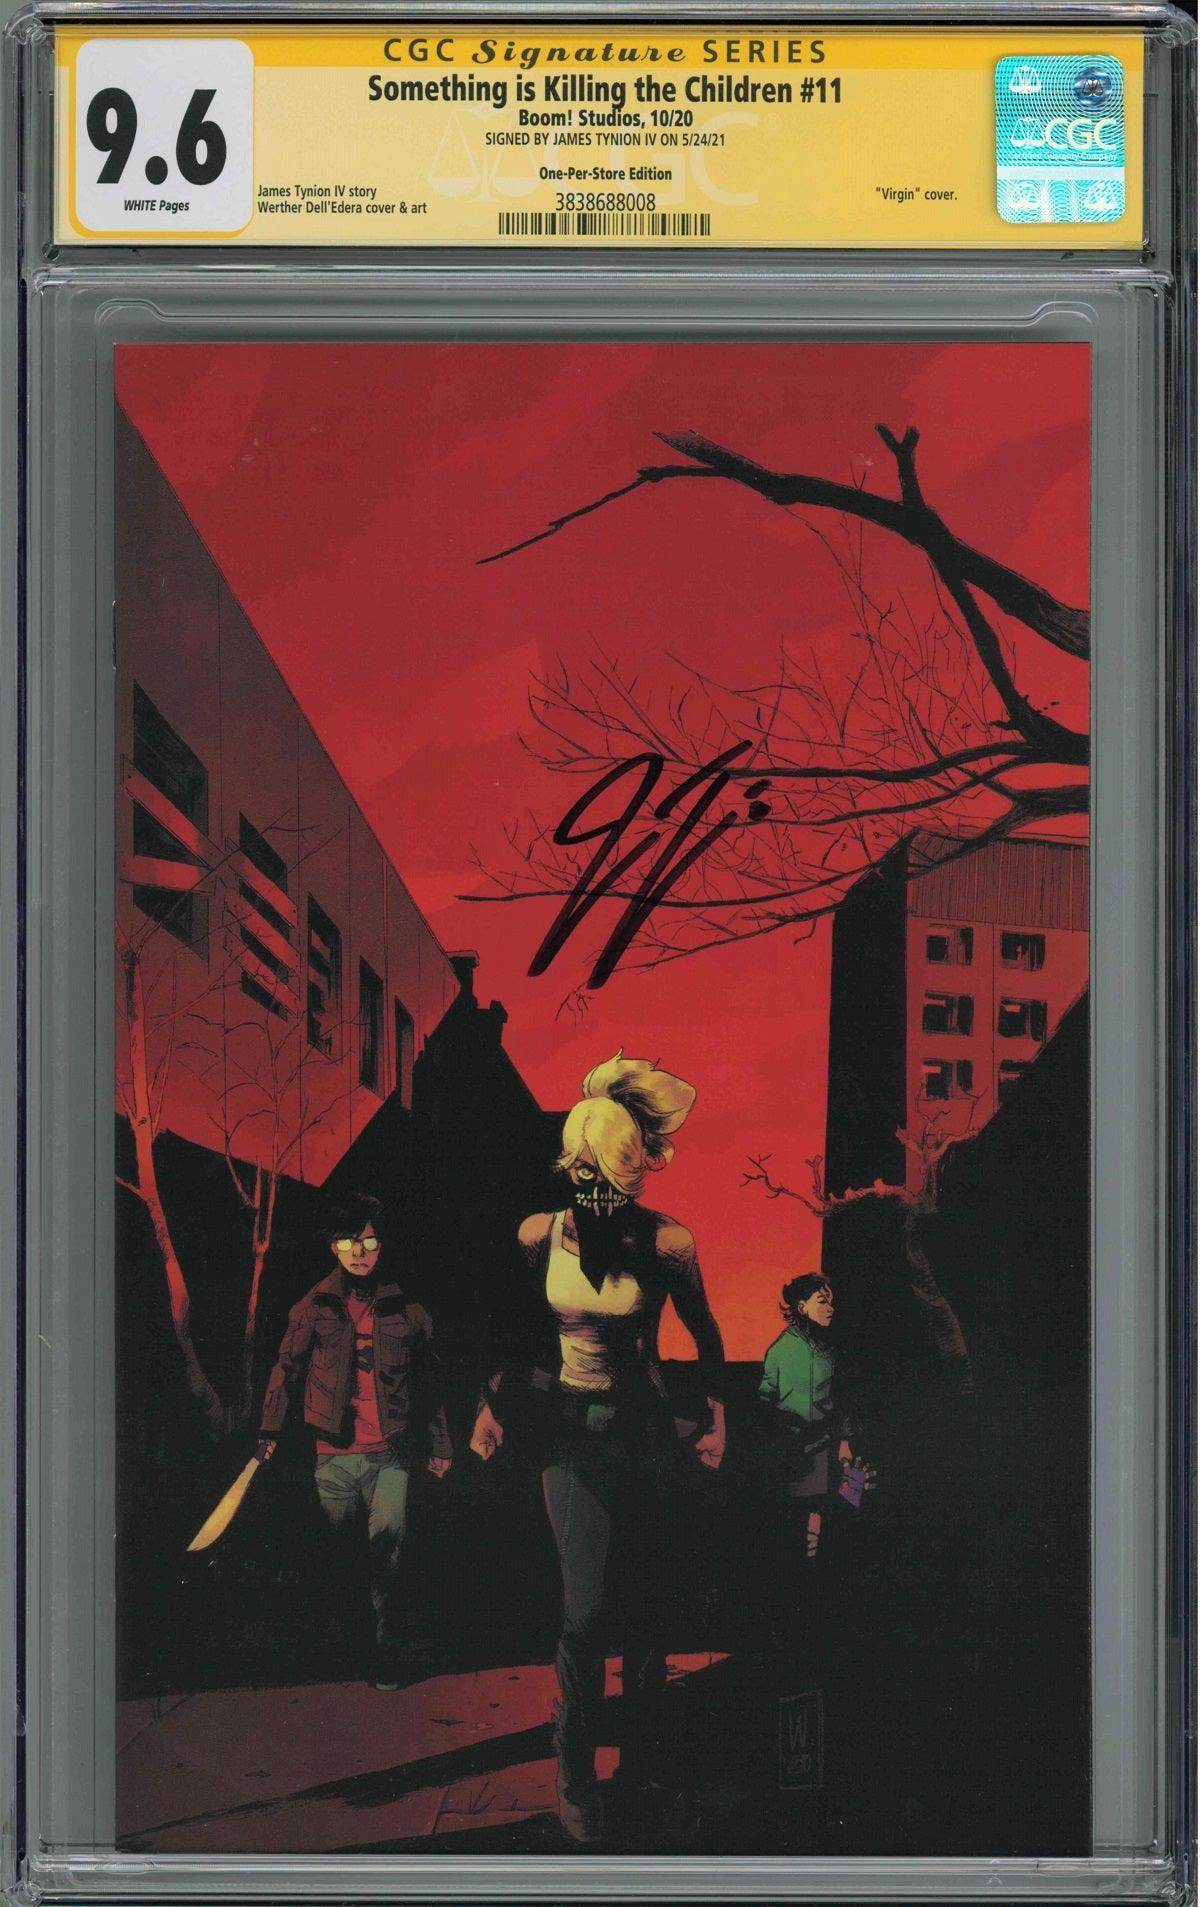 CGC SOMETHING IS KILLING THE CHILDREN #11 ONE PER STORE EDITION (9.6) SIGNATURE SERIES - SIGNED BY JAMES TYNION IV - Kings Comics